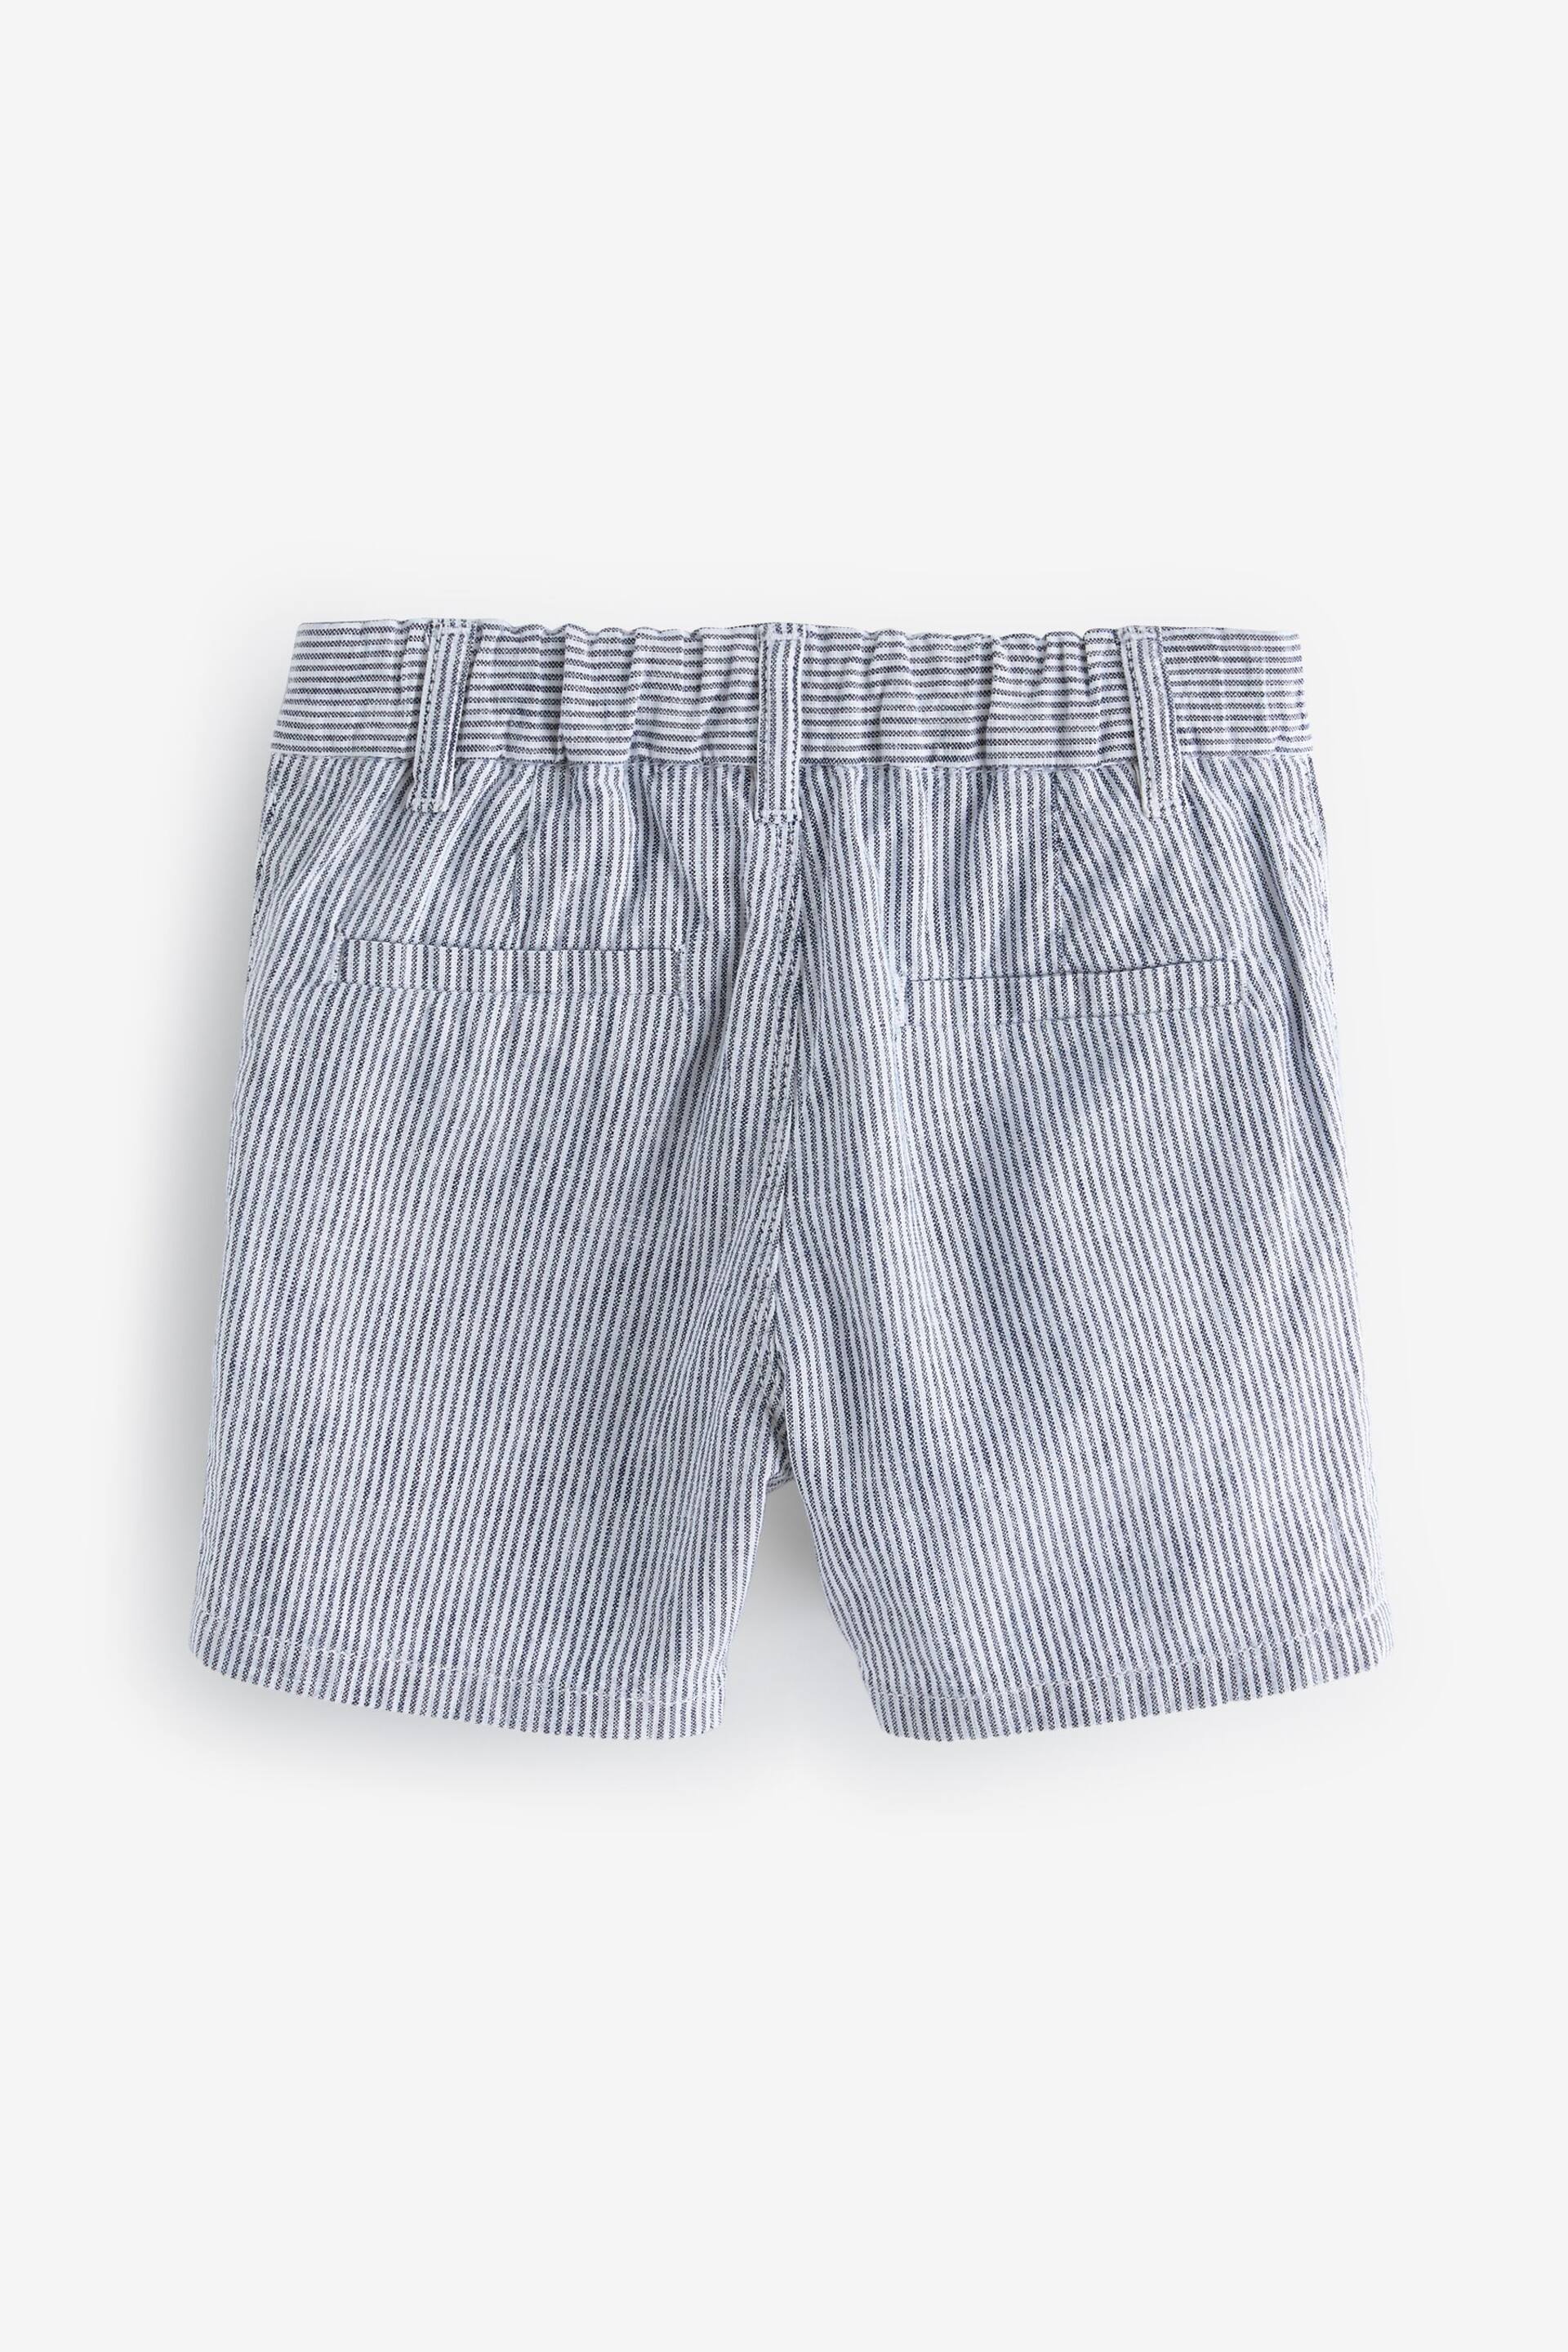 Ticking Stripe Linen Blend Chinos Shorts (3mths-7yrs) - Image 6 of 7